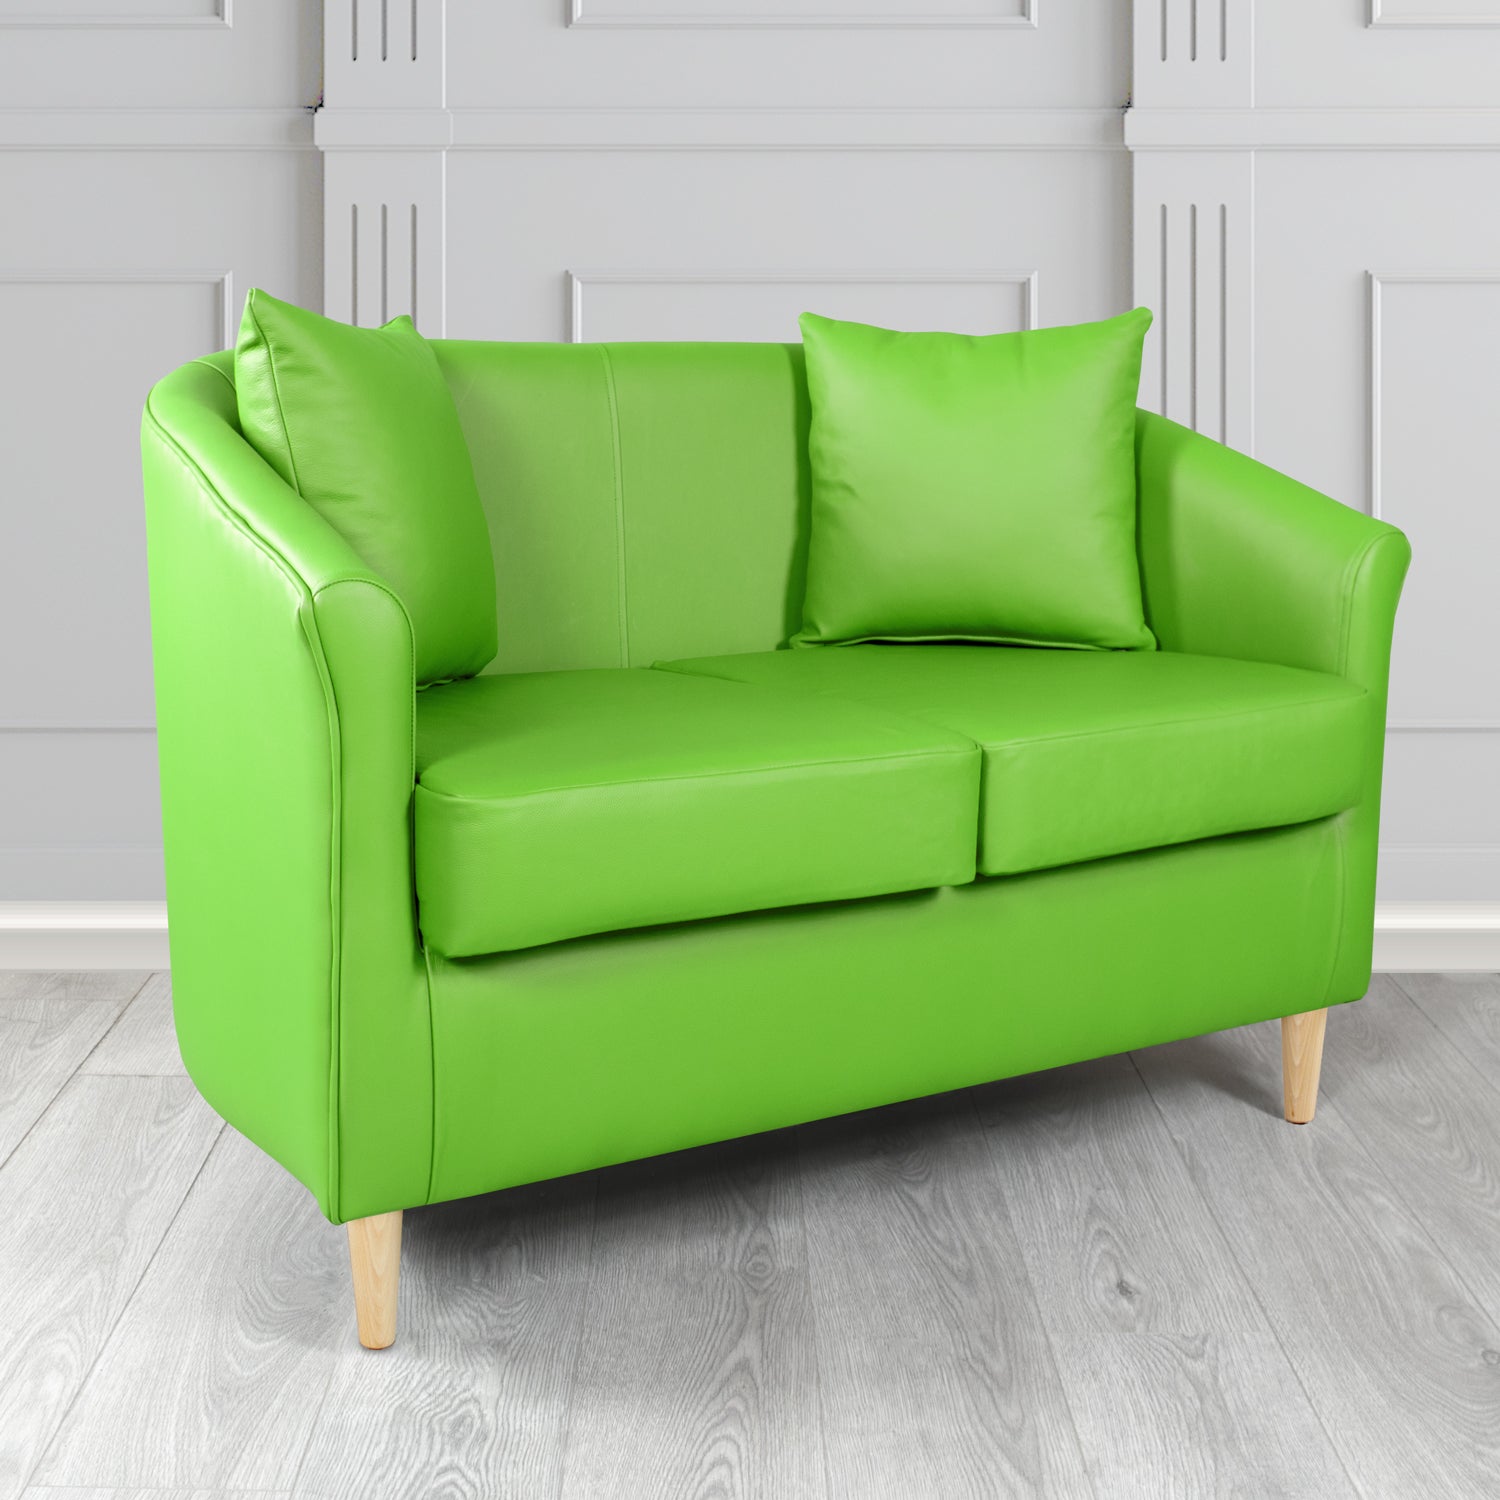 St Tropez 2 Seater Tub Sofa in Madrid Lime Faux Leather - The Tub Chair Shop